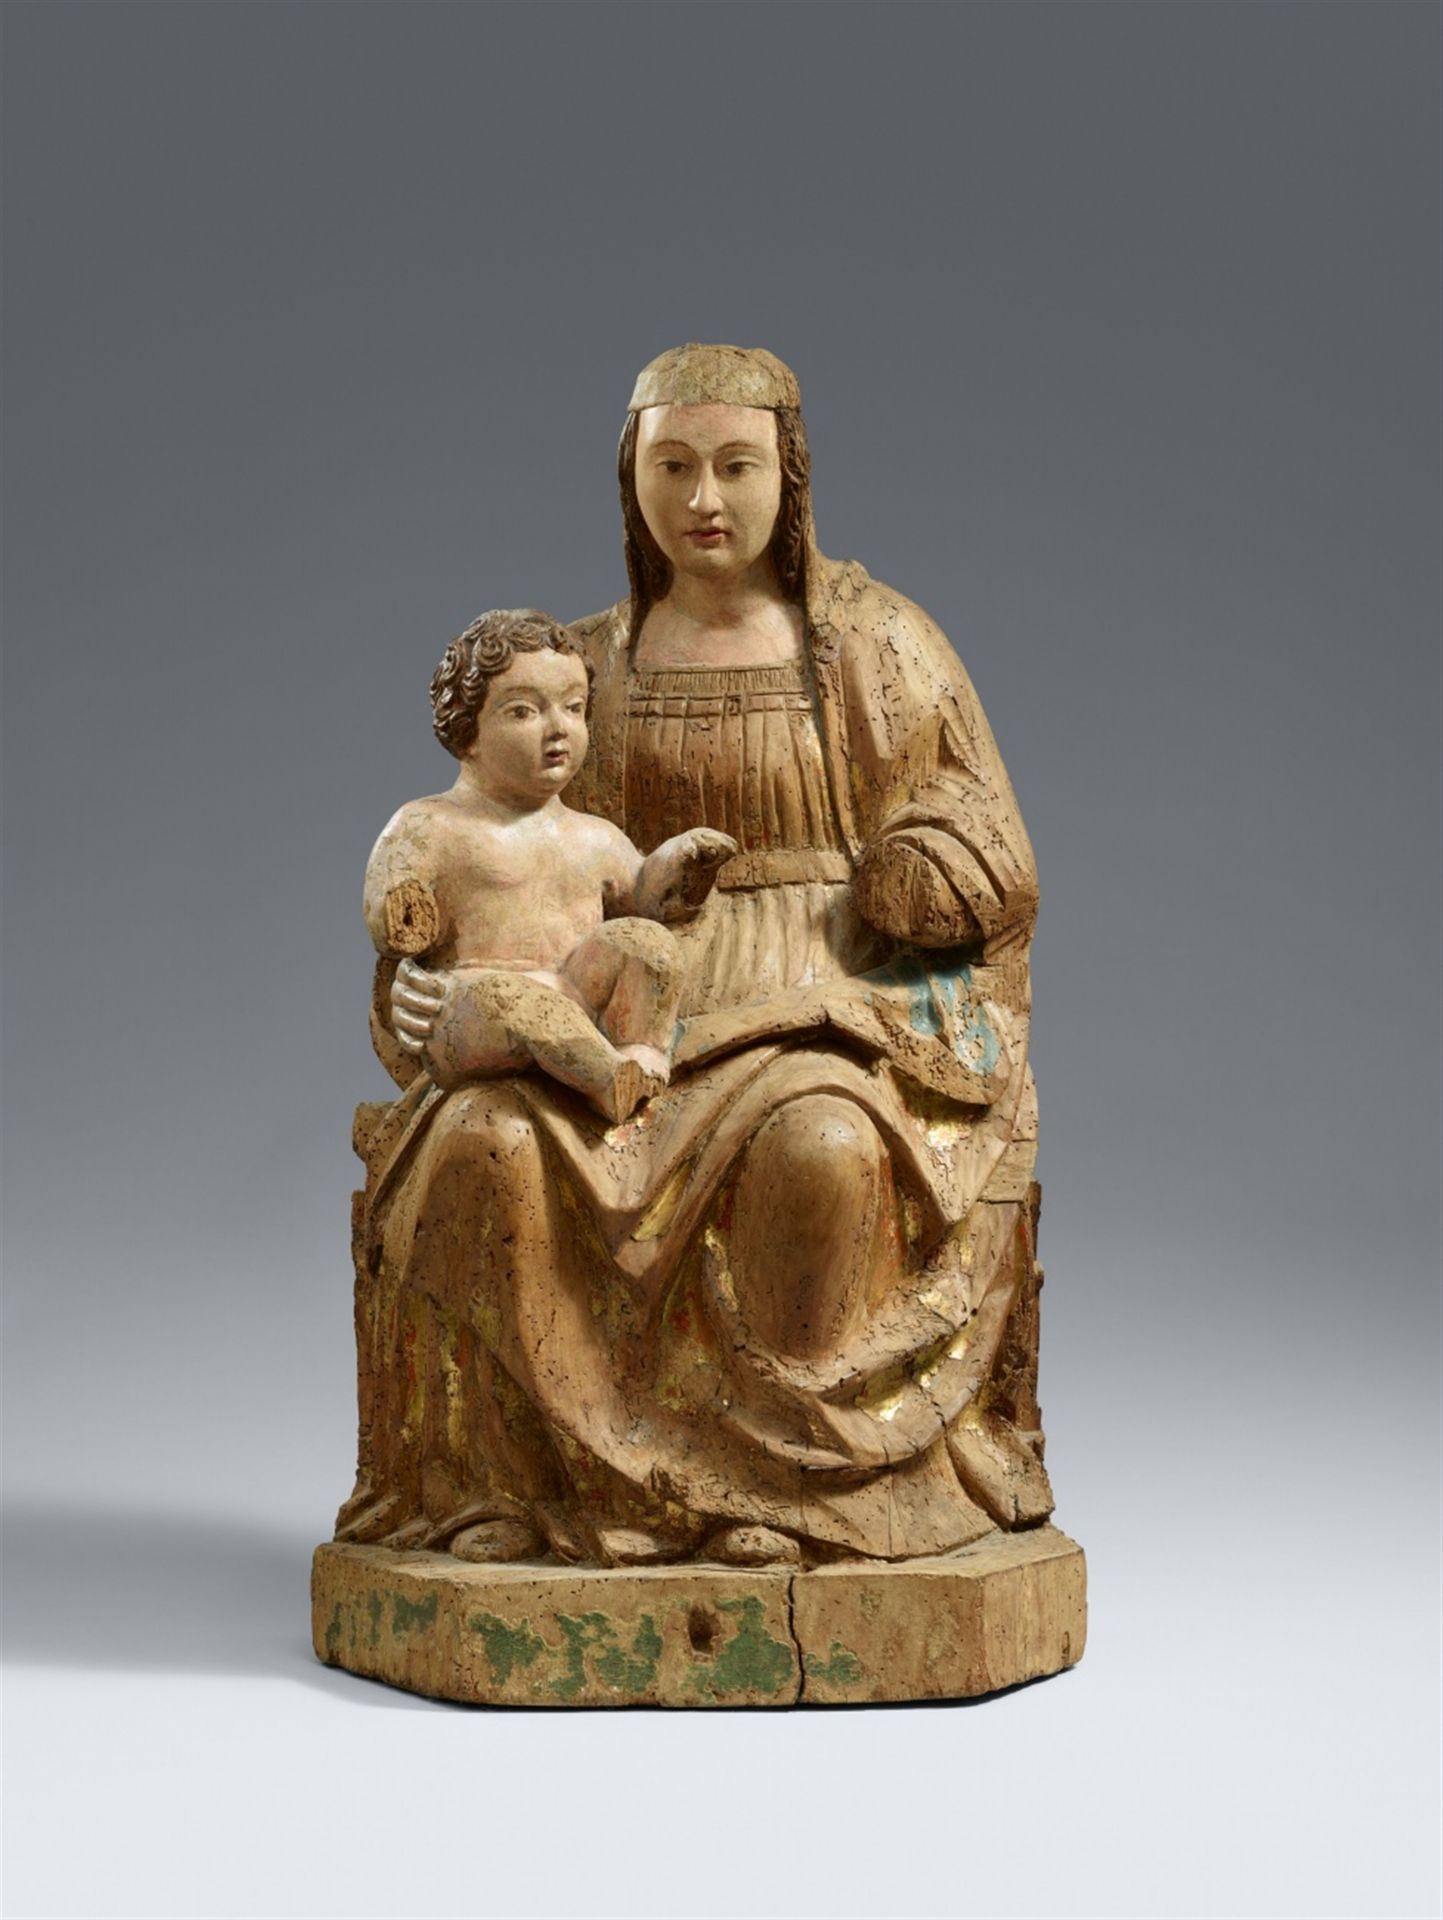 A North Italian carved wood figure of the Virgin Enthroned, 2nd half 15th century